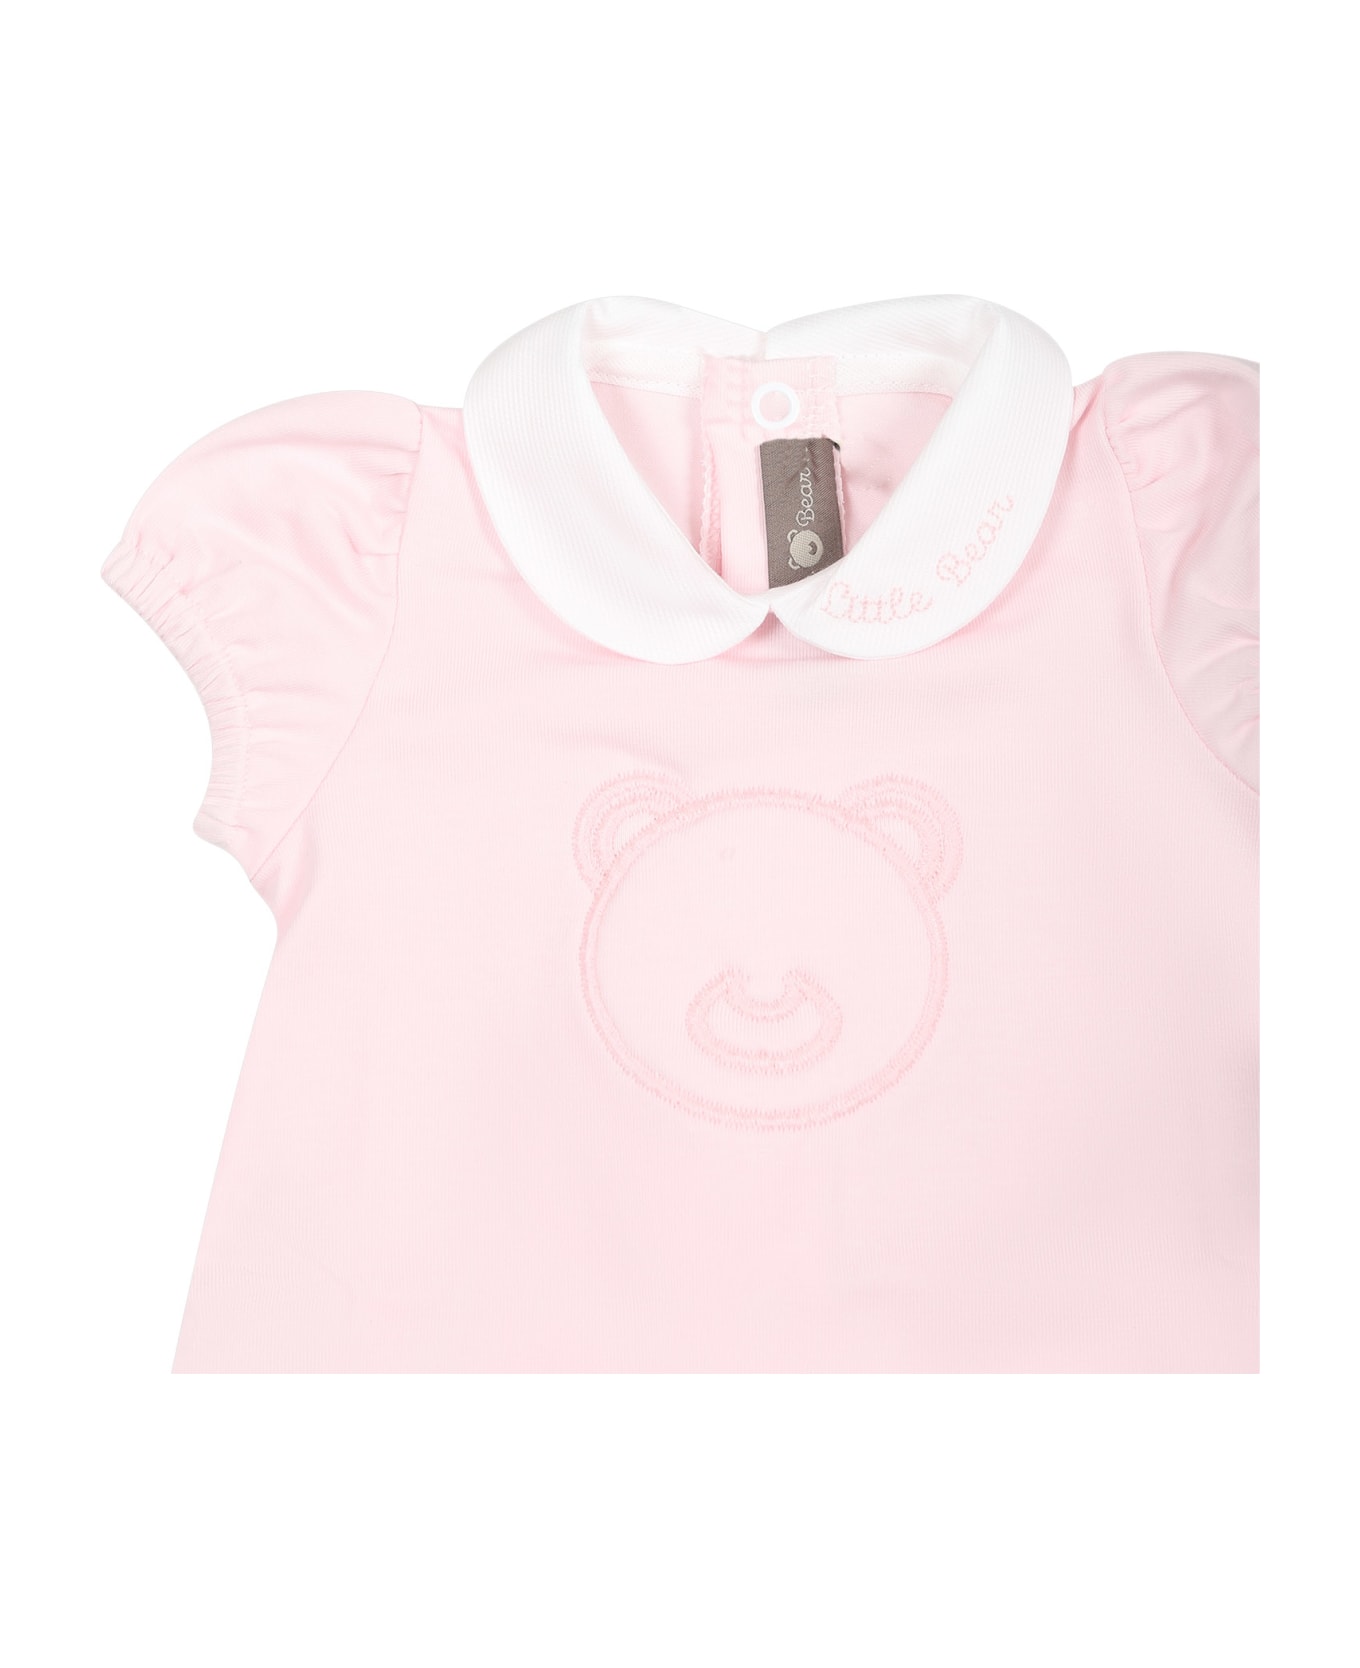 Little Bear Pink Romper For Baby Girl With Bear - Pink